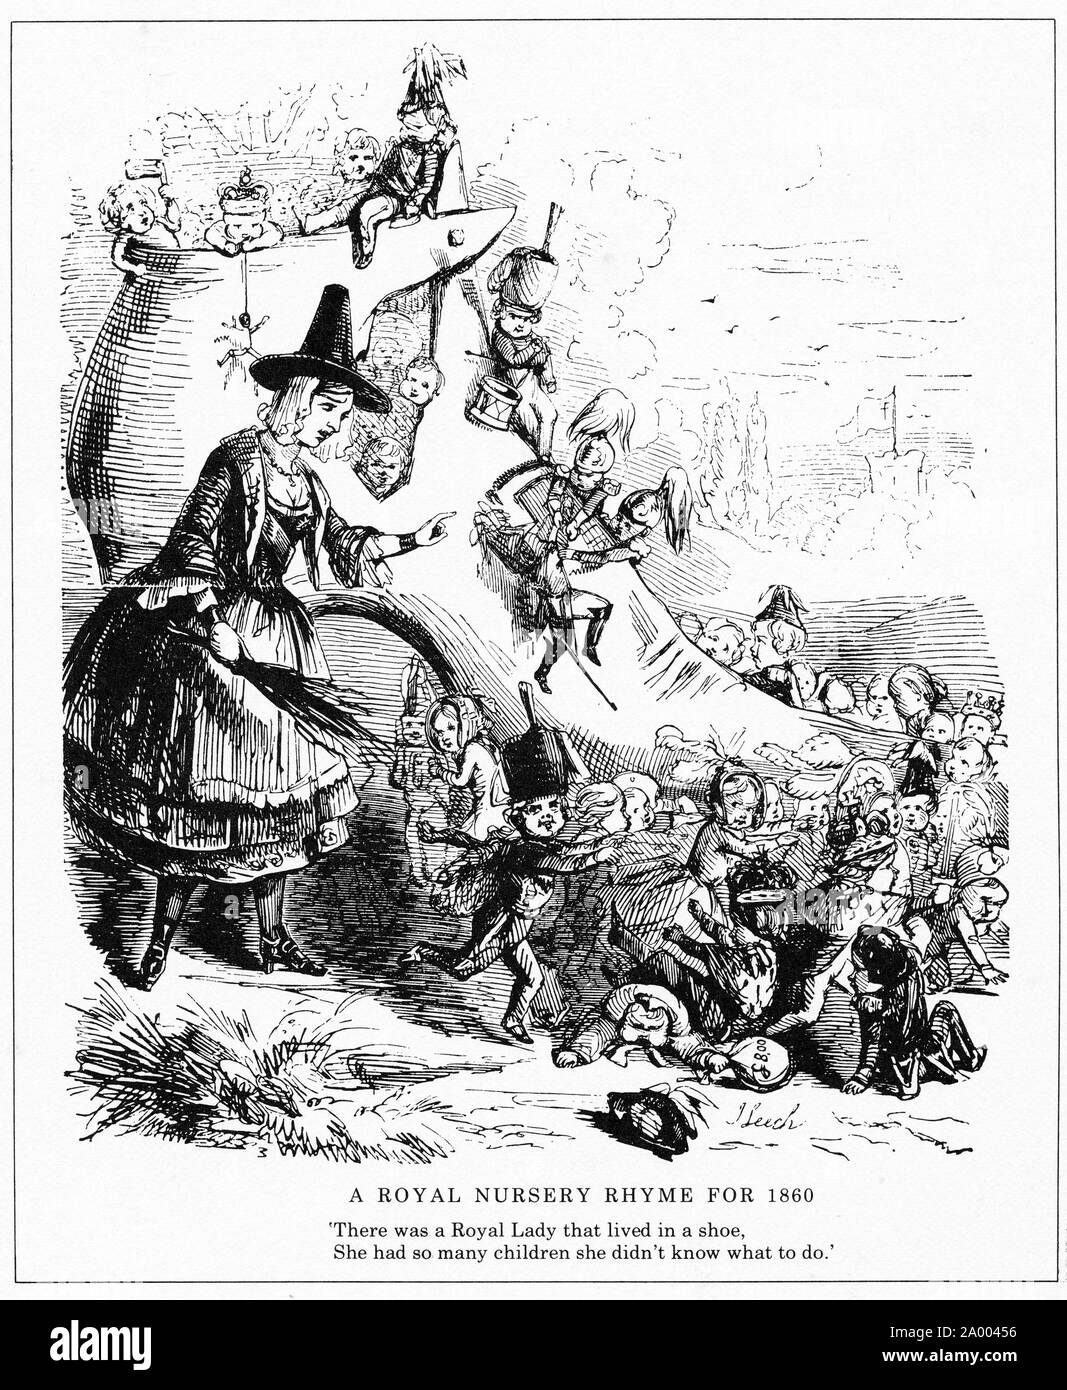 Engraving of a 'royal nursery rhyme', printed after the birth of Queen Victoria's fourth child.. From Punch magazine. Stock Photo